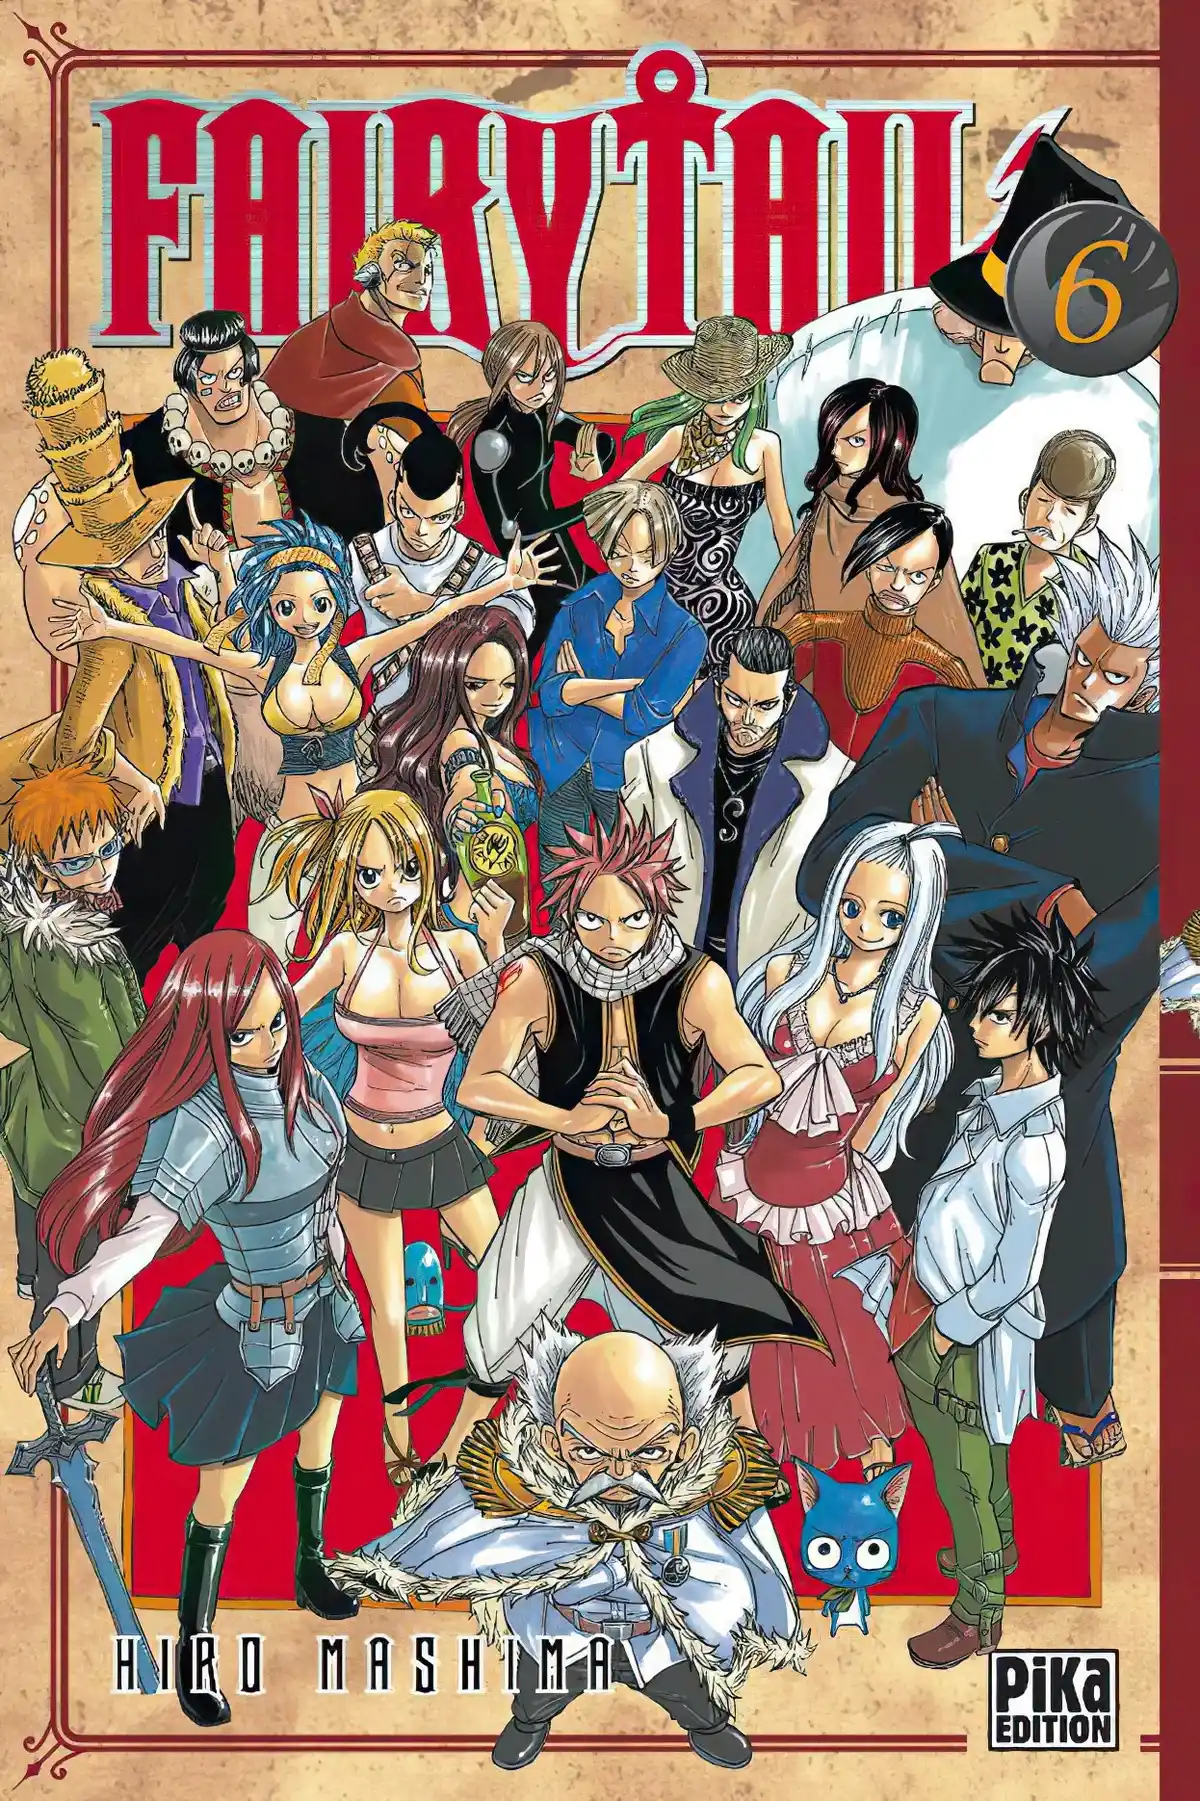 Fairy Tail Volume 6 page 1